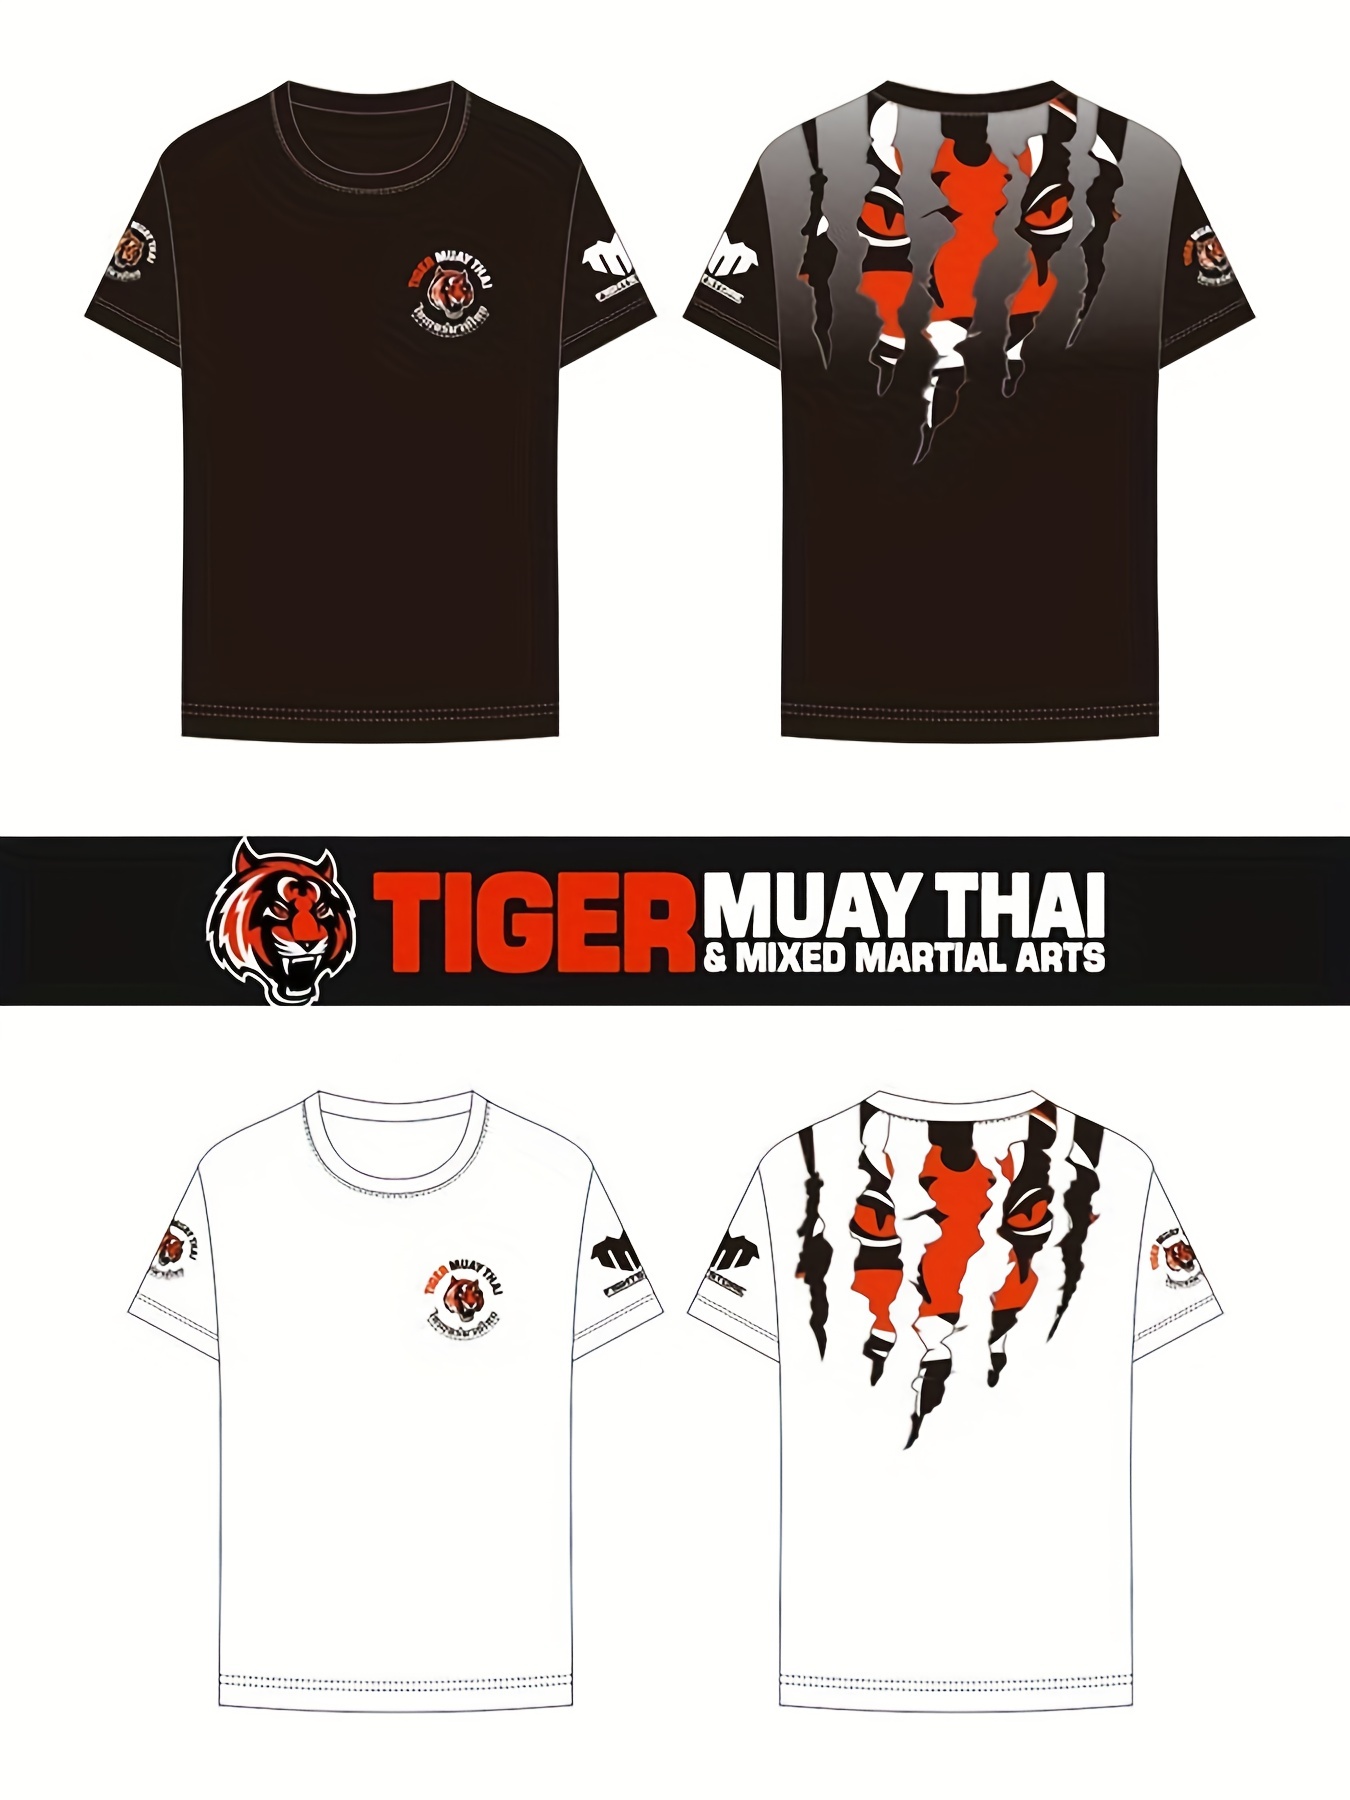 Tiger with claw marks' Men's T-Shirt